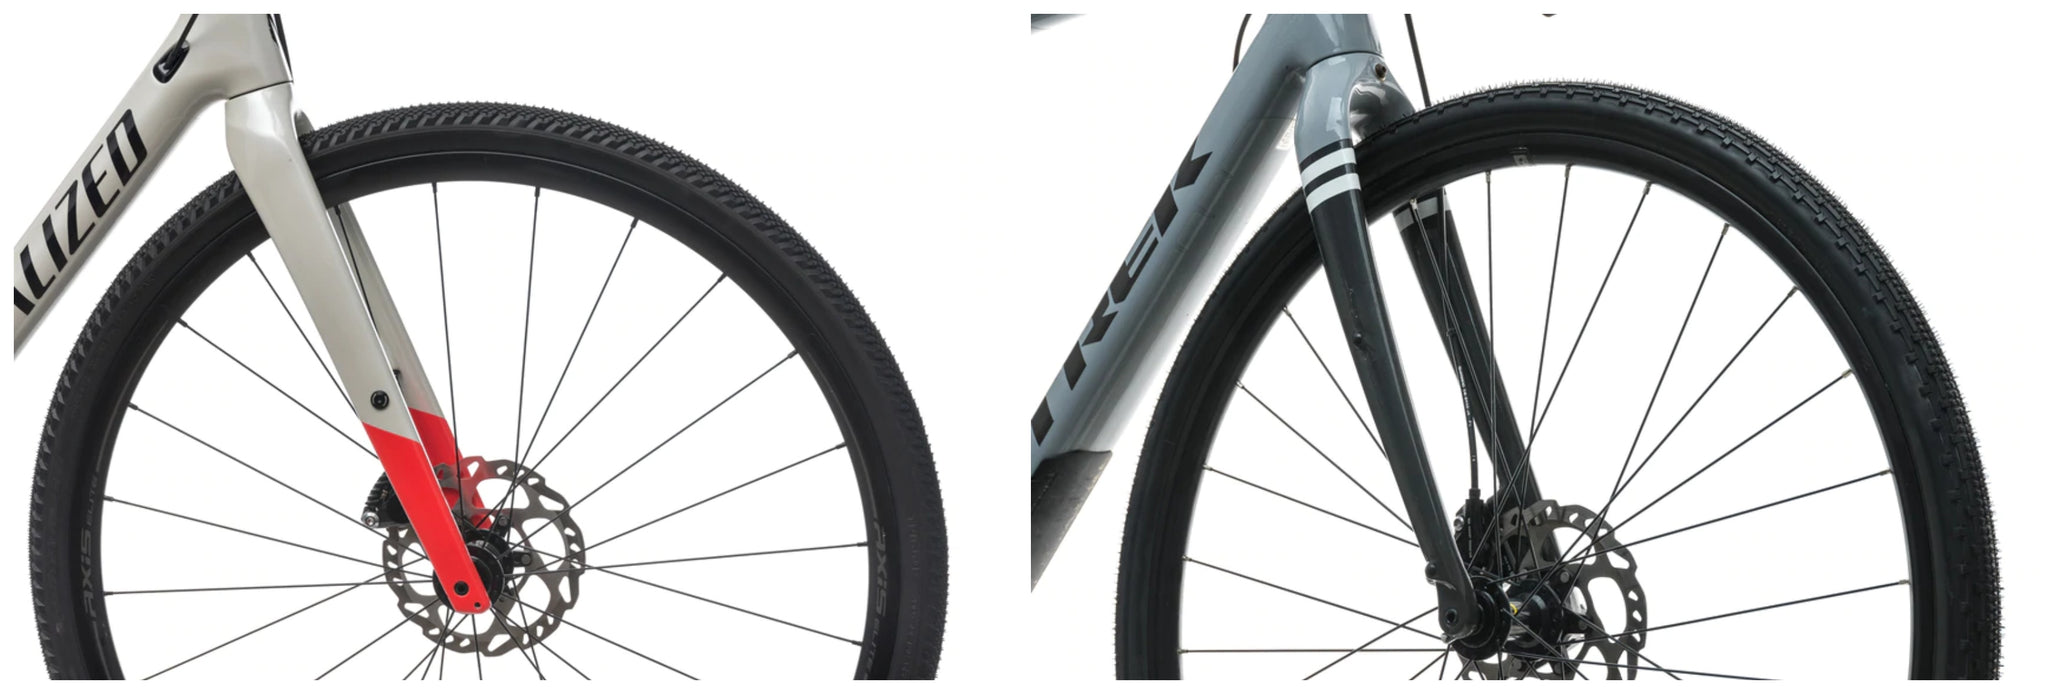 Specialized Diverge vs. Trek Checkpoint tire clearance